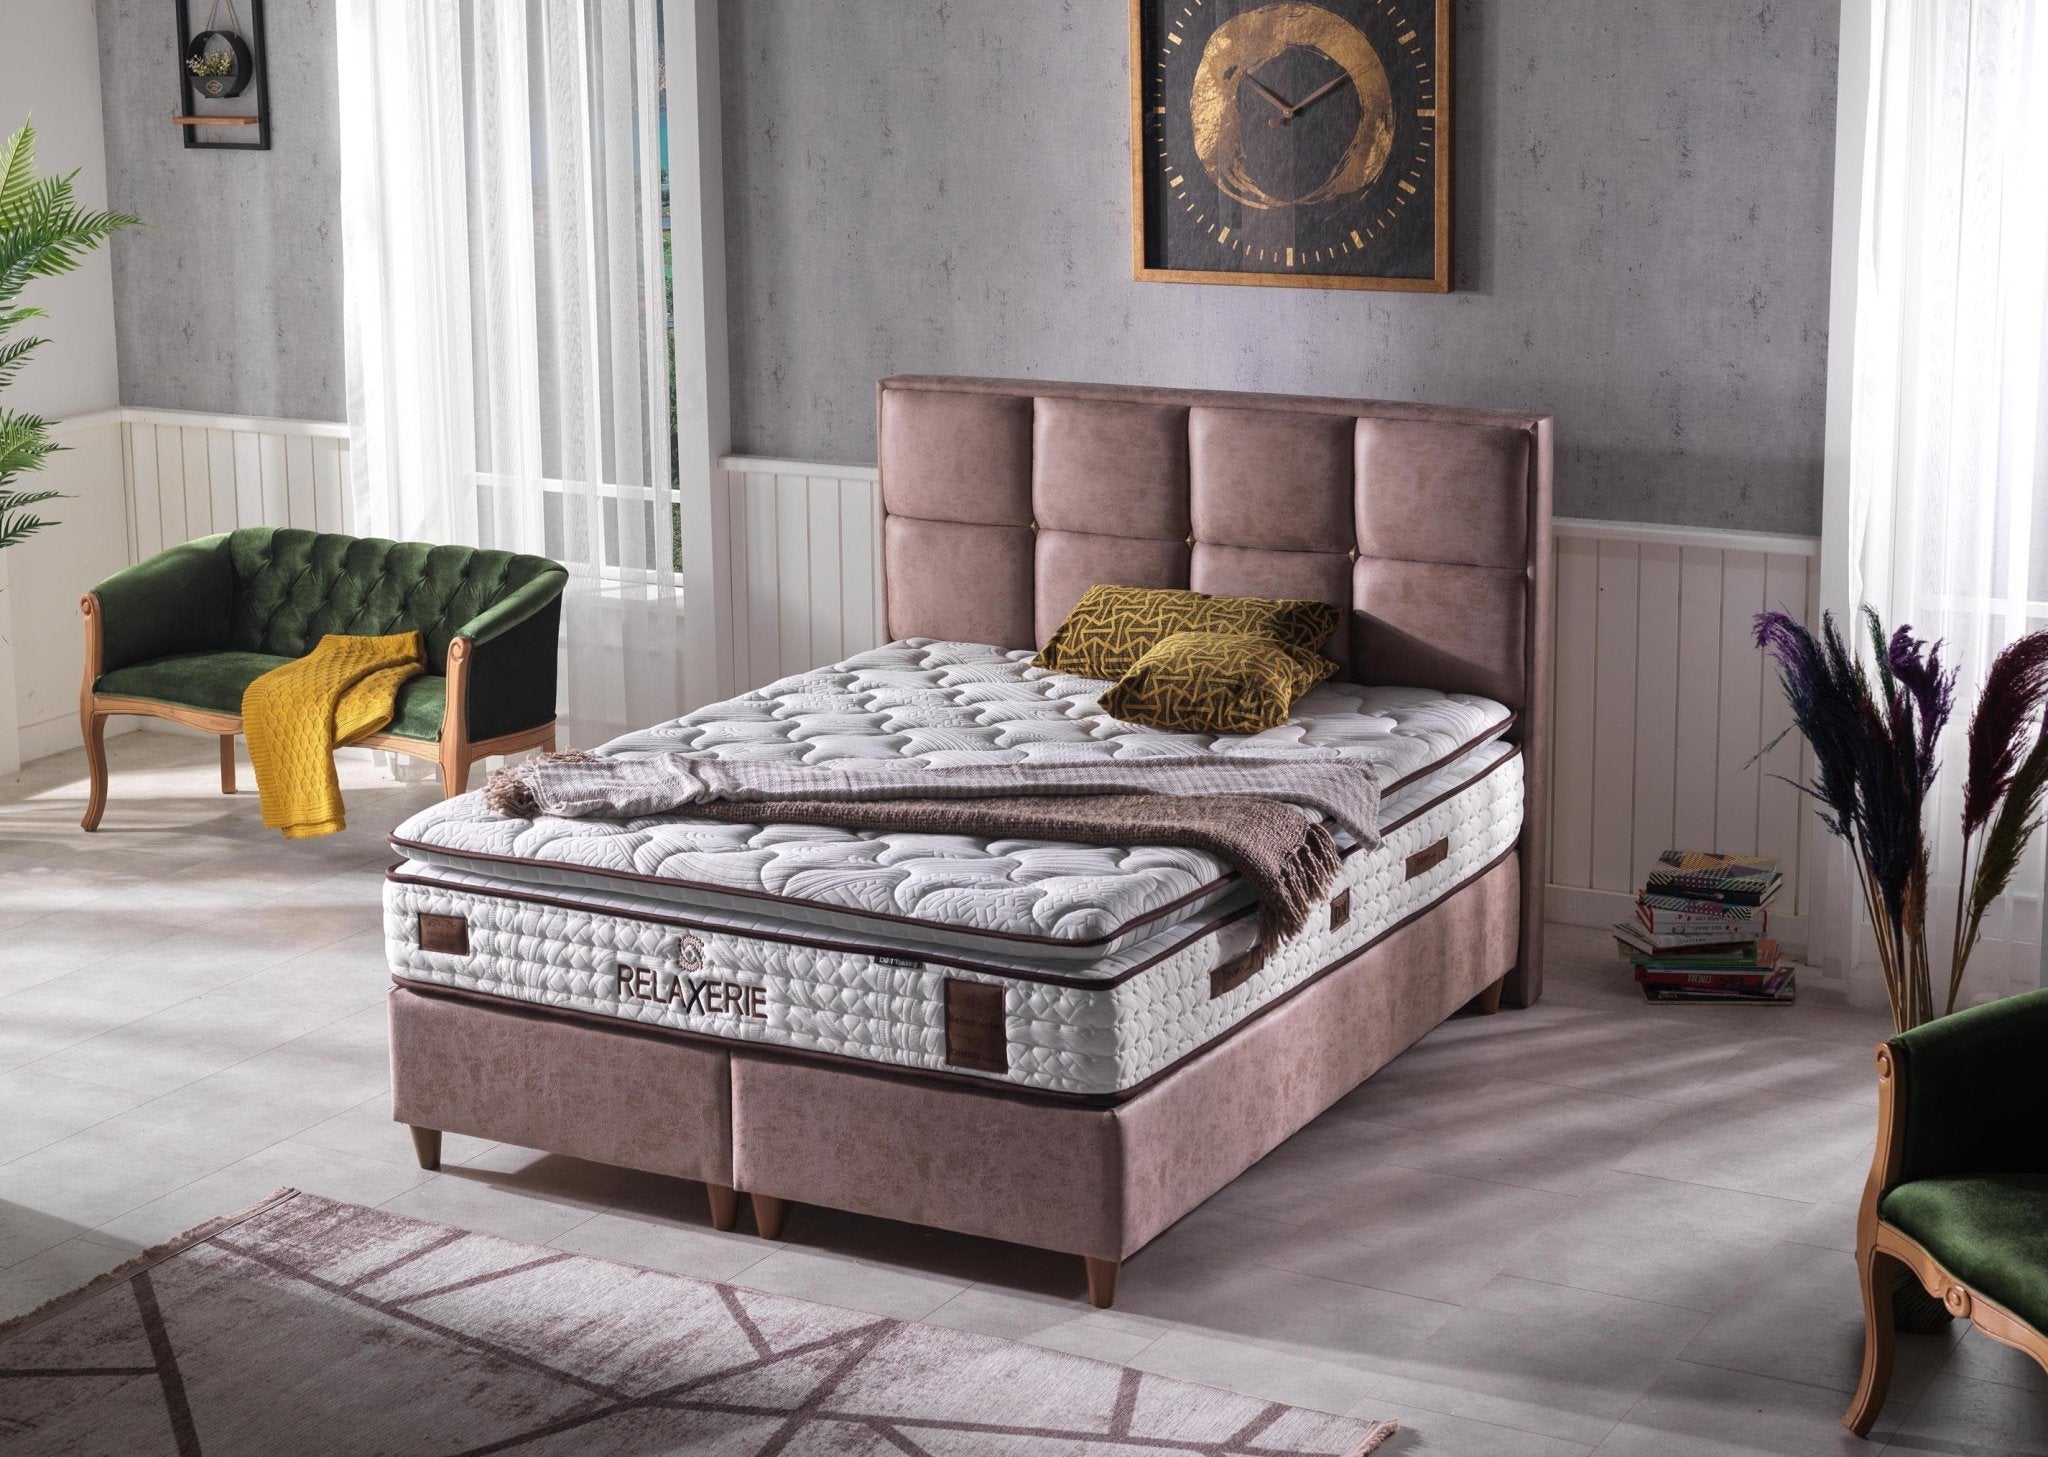 RELAXERIE Bed - Berre Furniture